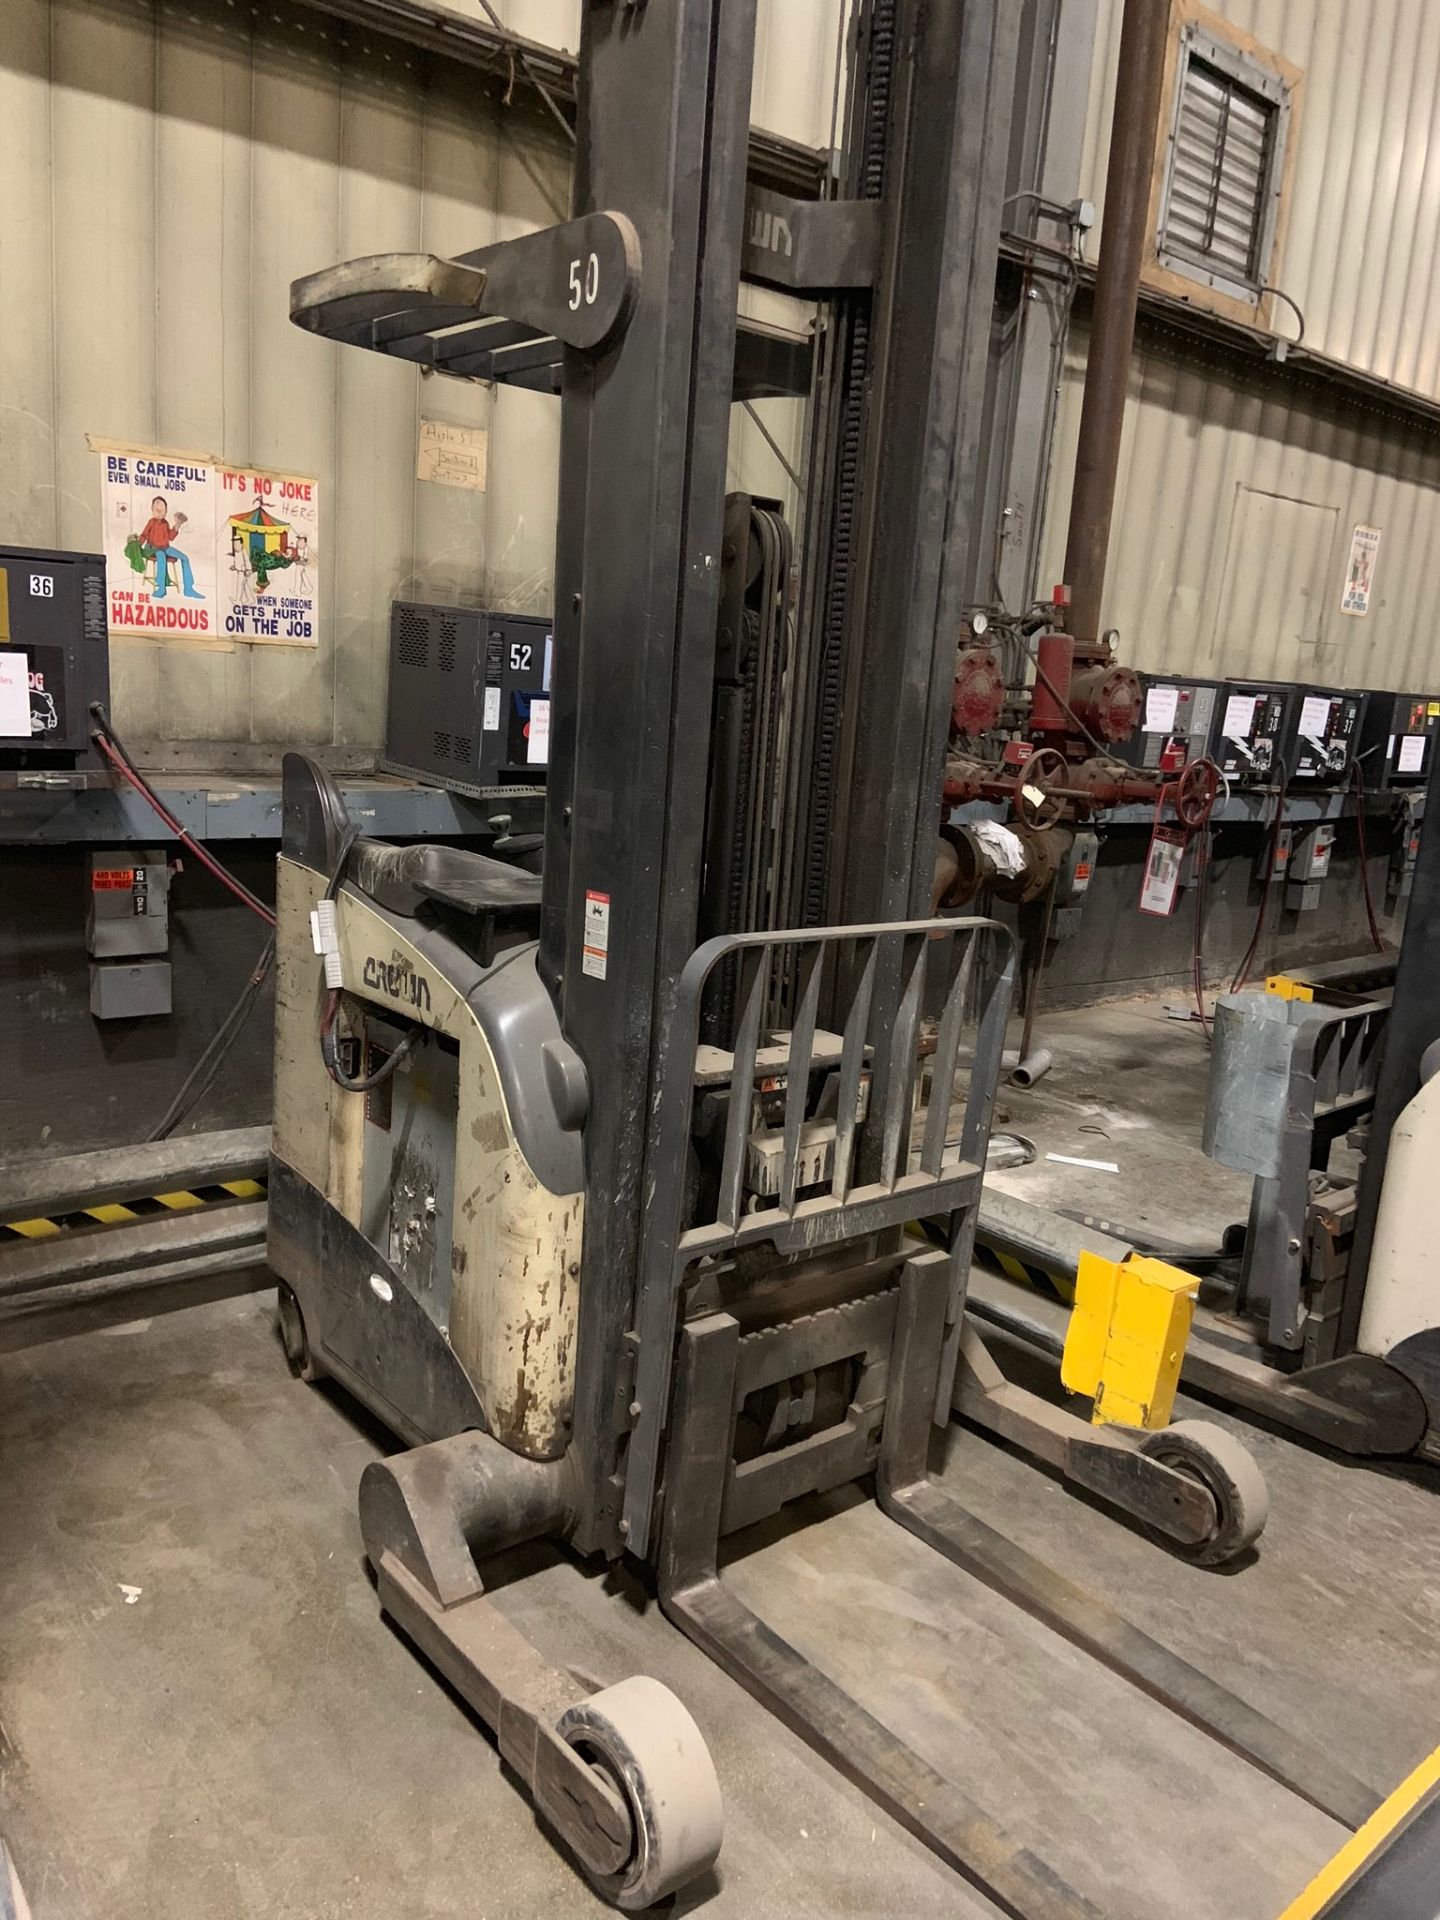 Forklift: Stand Up Electric Forklift. Make: Crown. Model: RR5220-45. S/N: 1A1247046. Year: 2001.